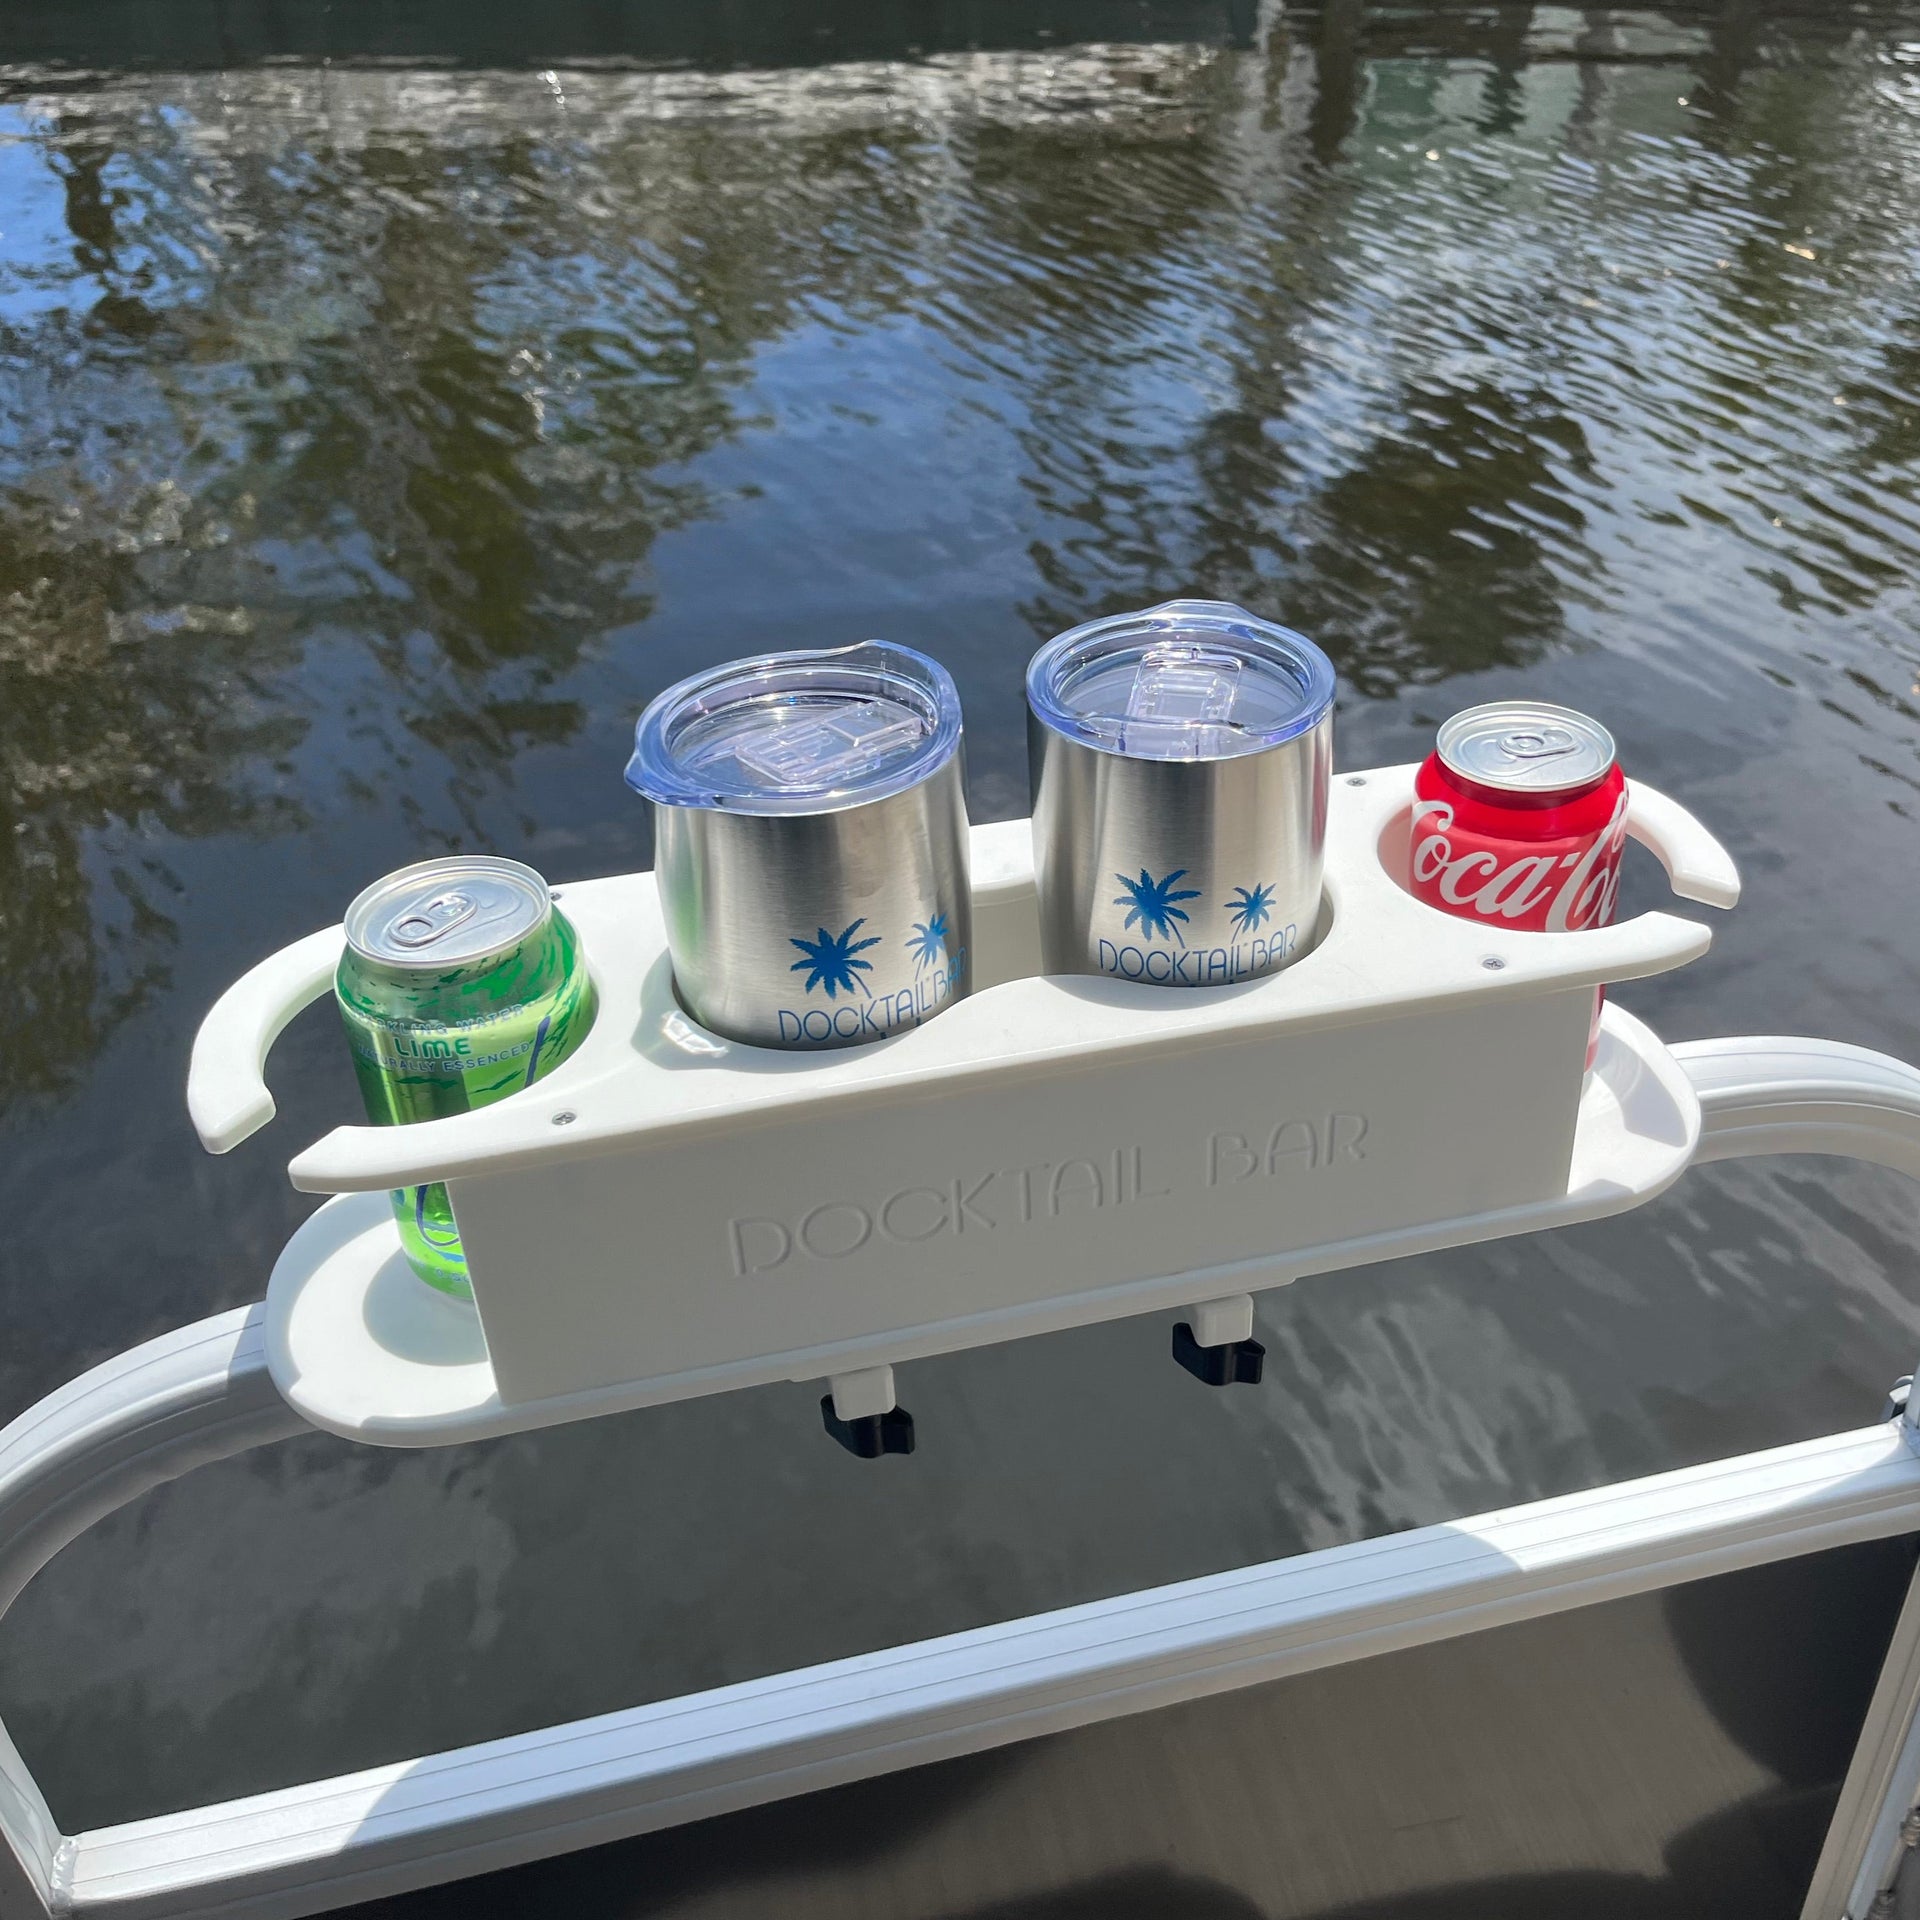 Docktail Bar Pontoon Boat Cup Holder Caddy - Multiple Colors Available with  SeaDek Kit Option